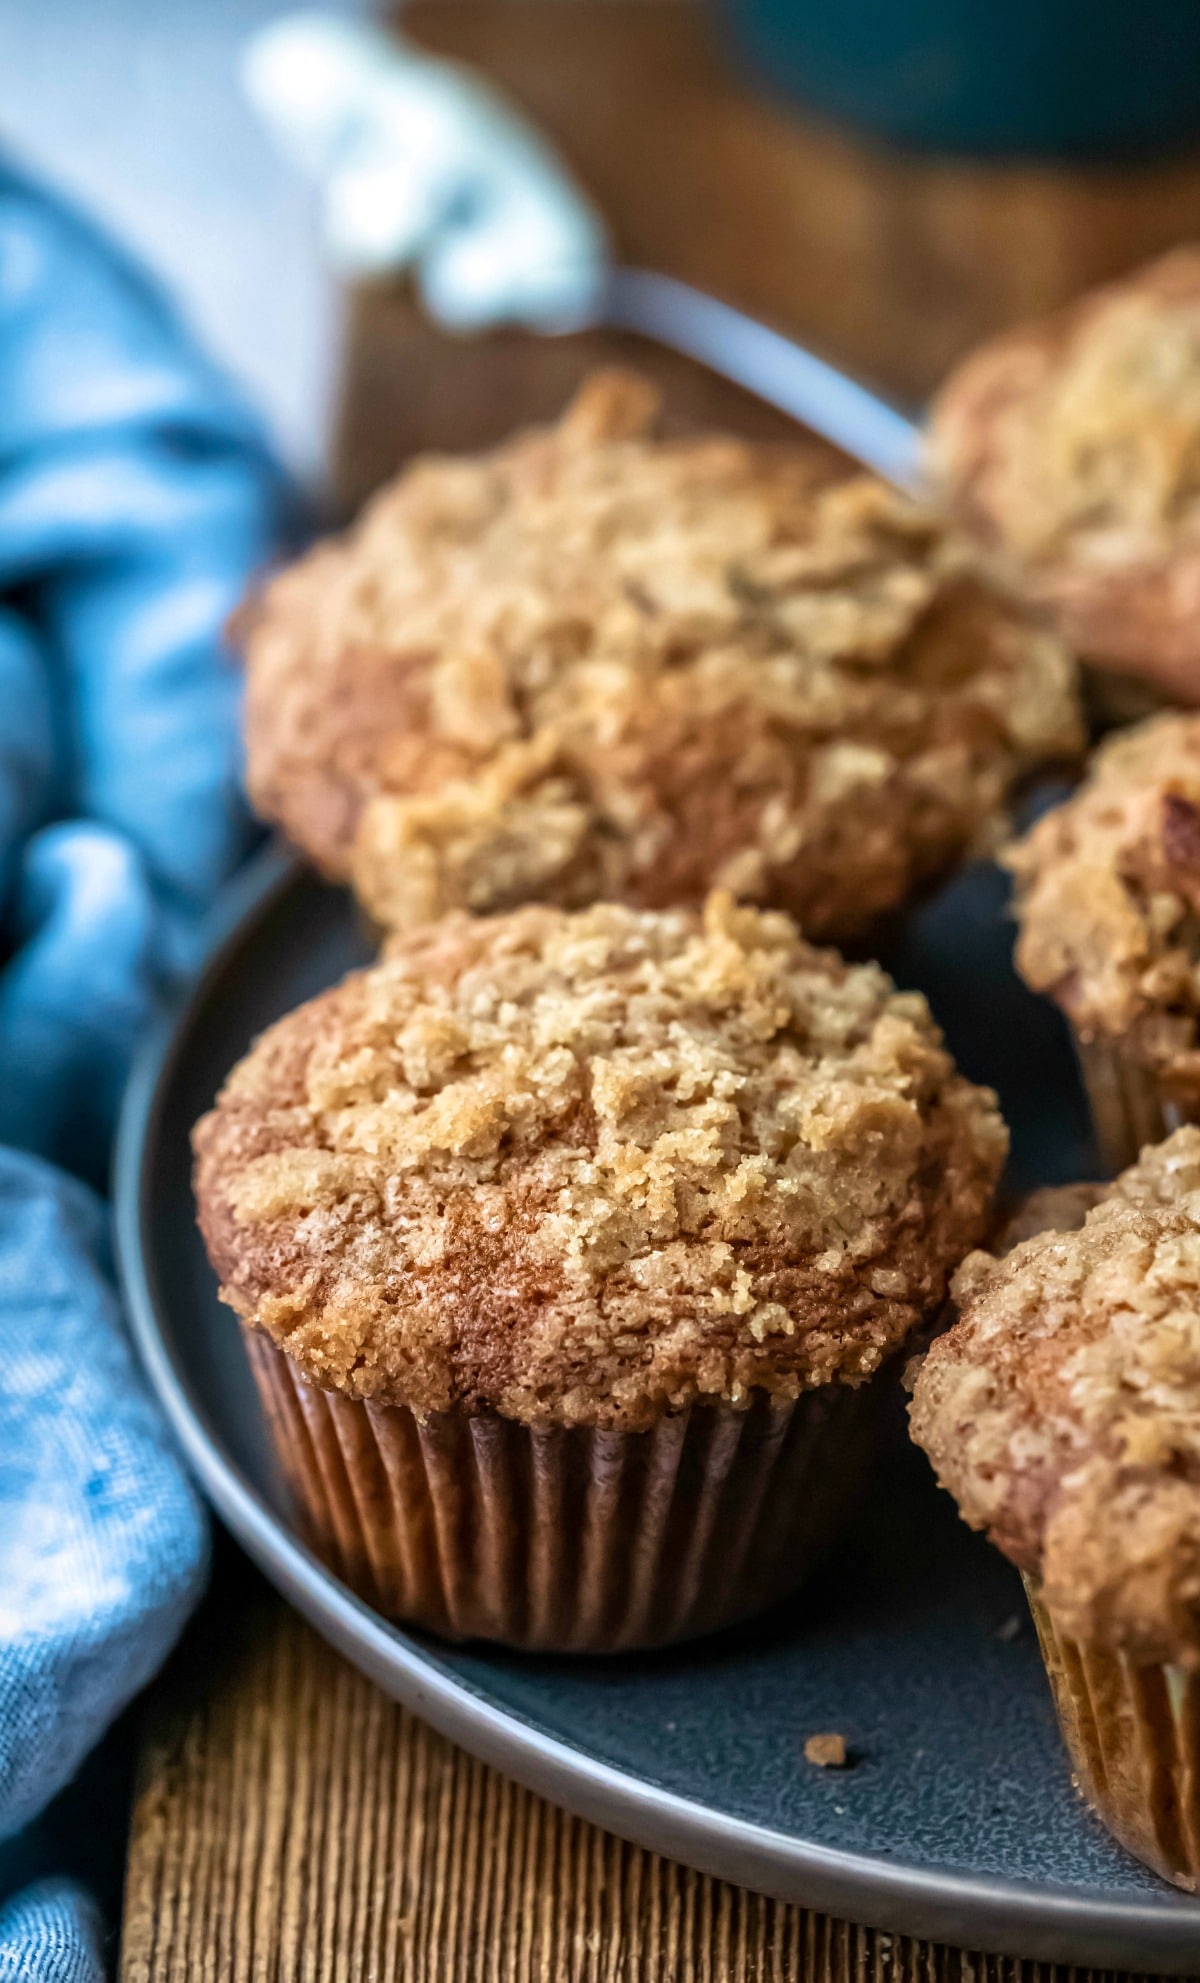 Plate of banana crumb muffins next to a blue linen napkin